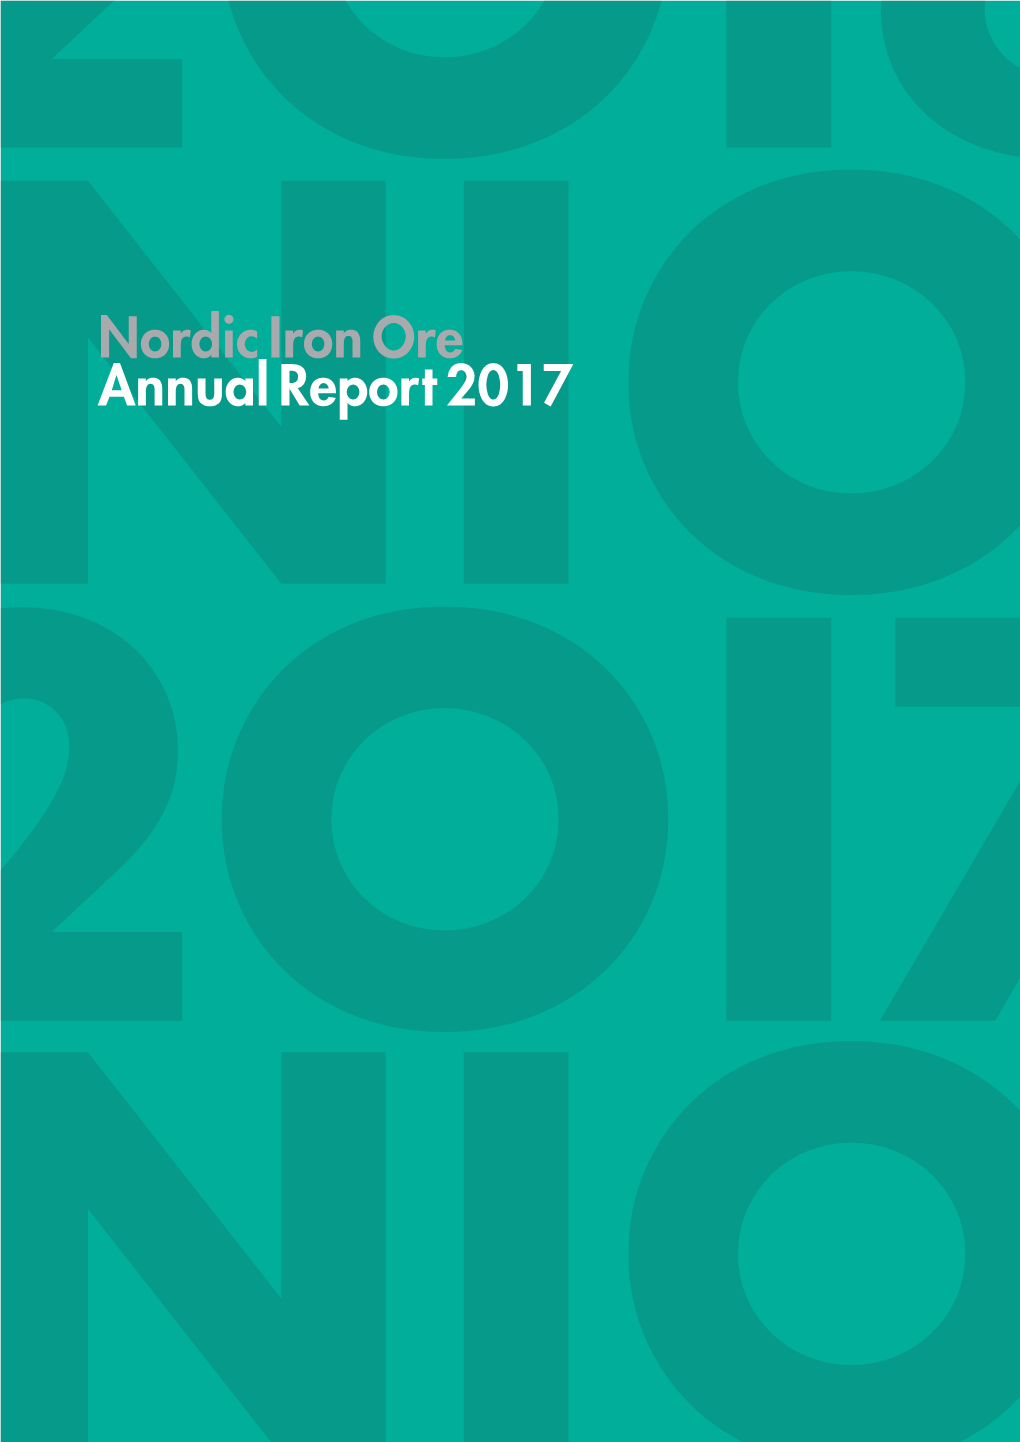 Nordic Iron Ore Annual Report 2017 Table of Contents